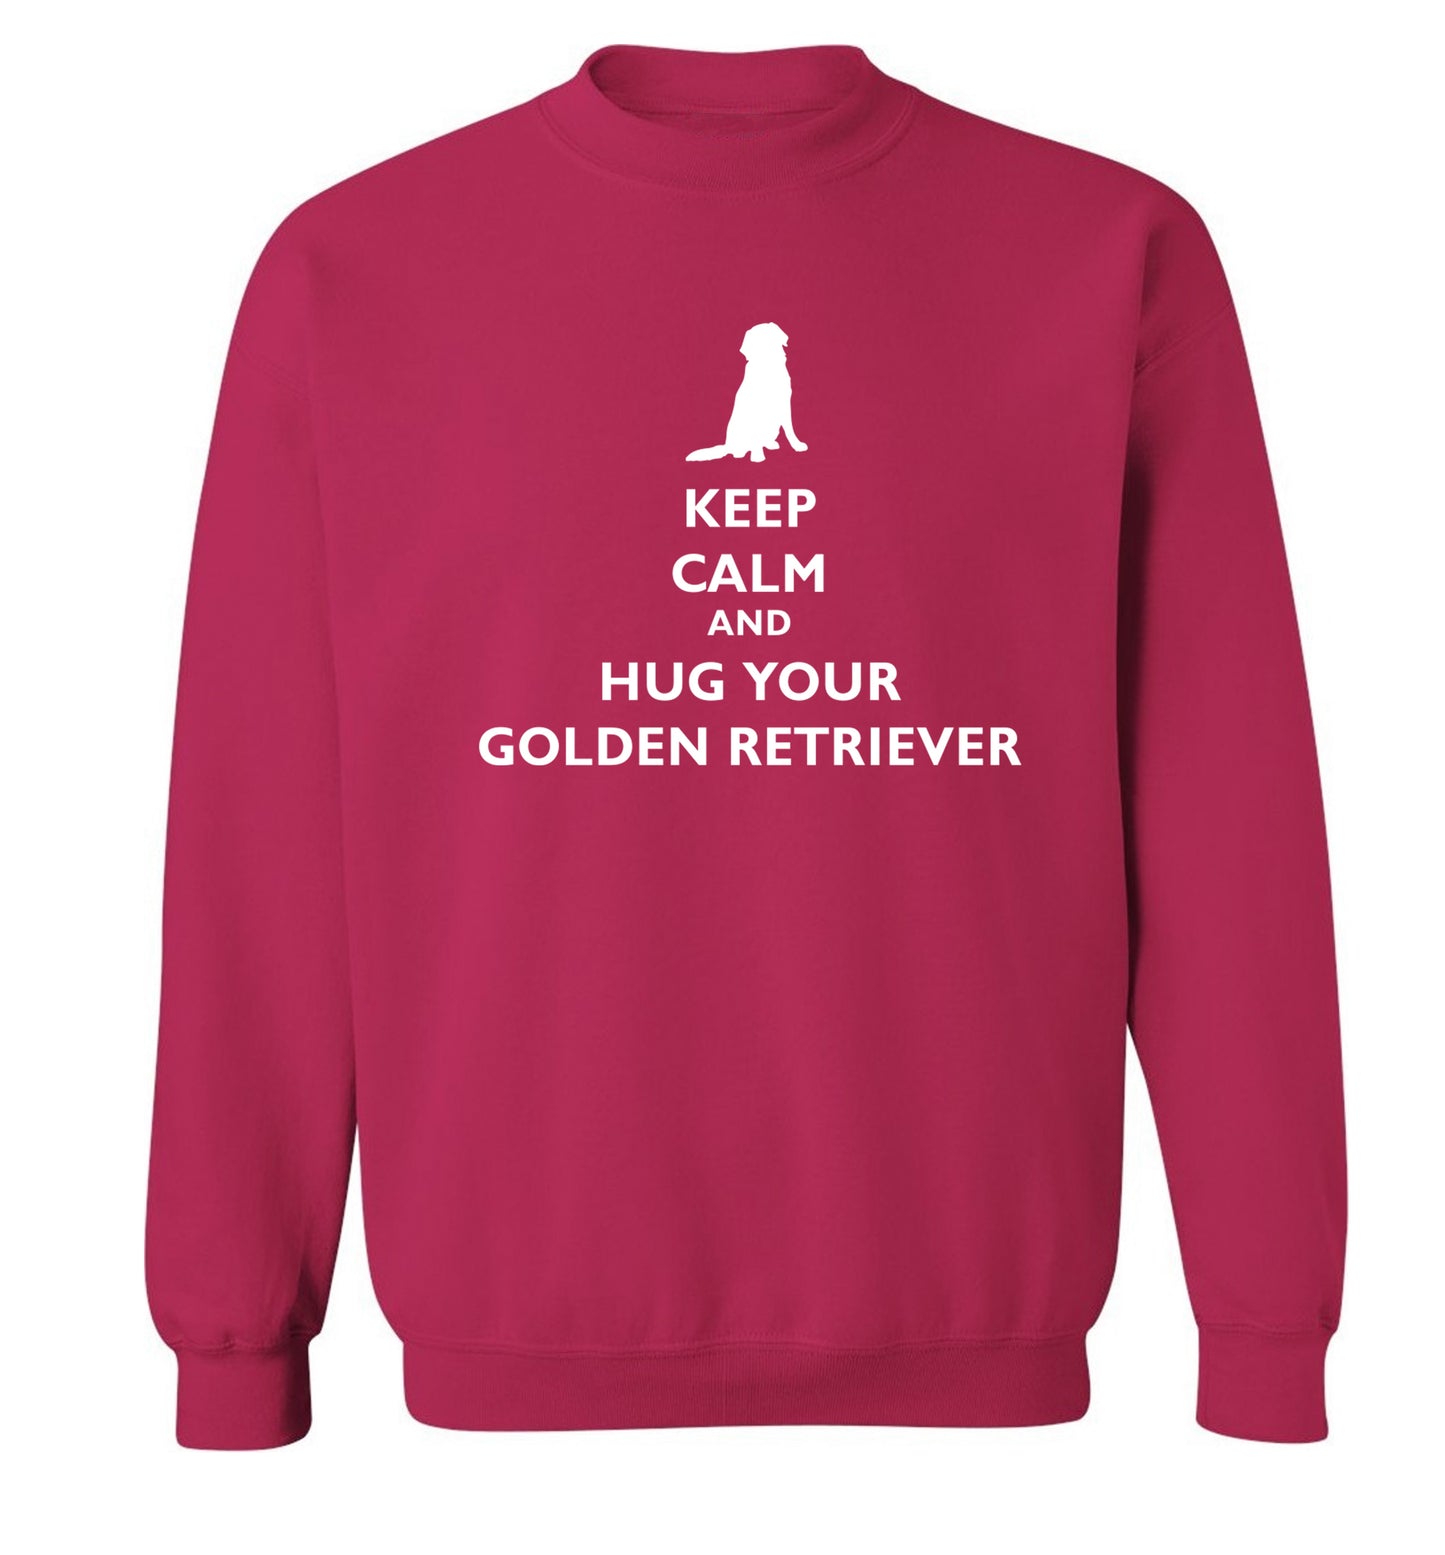 Keep calm and hug your golden retriever Adult's unisex pink Sweater 2XL